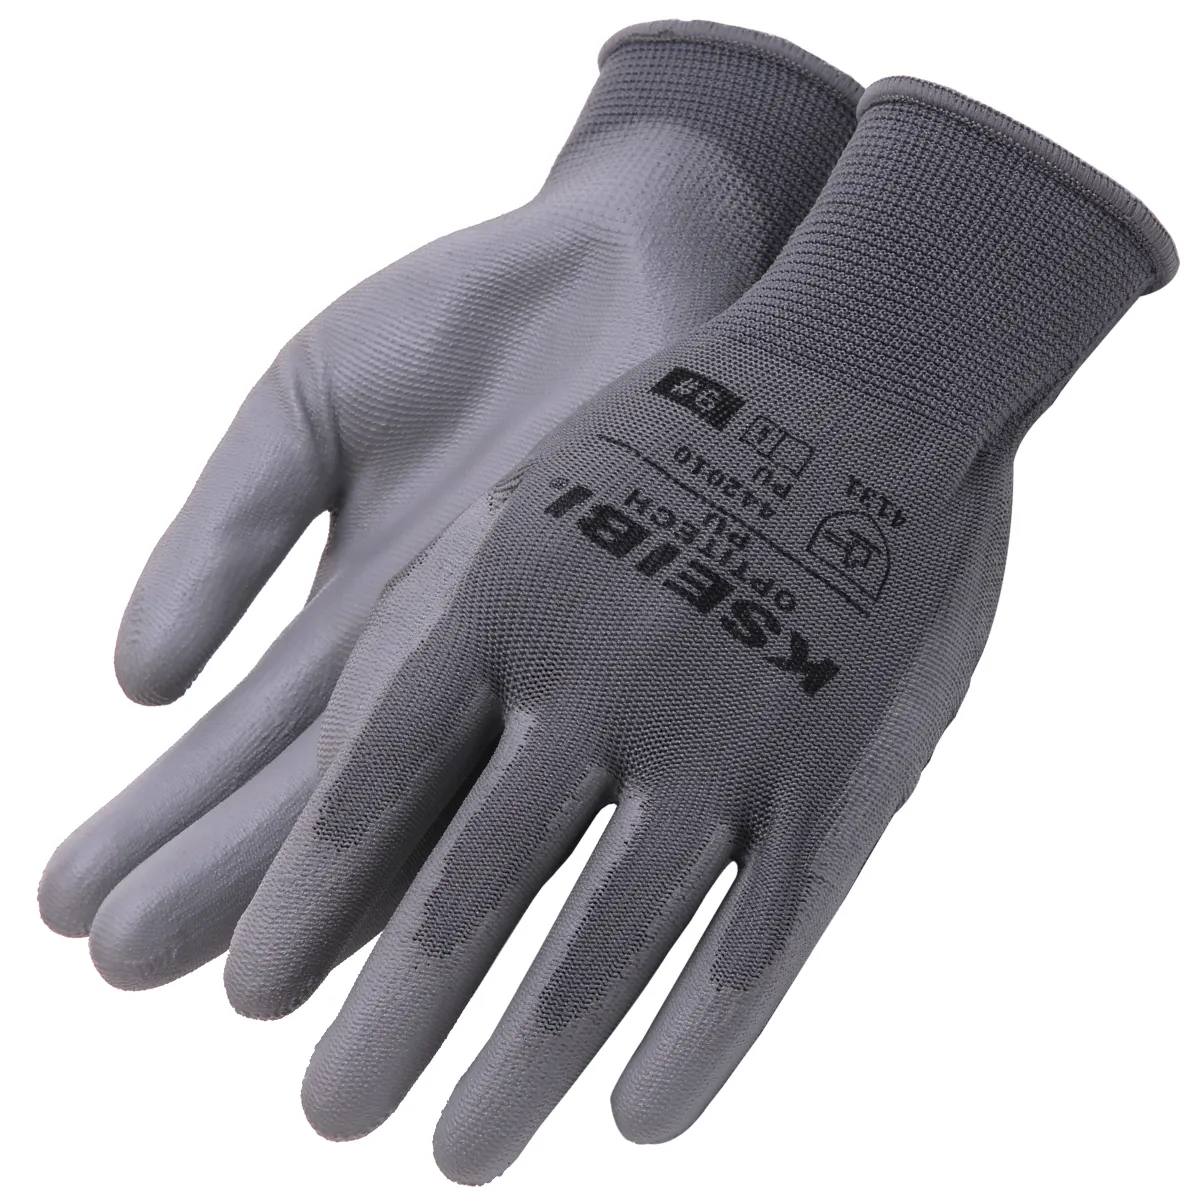 KSEIBI High Quality M #9 L #10 PU GLOVES Polyurethane To Protect Hands From Work Hazards